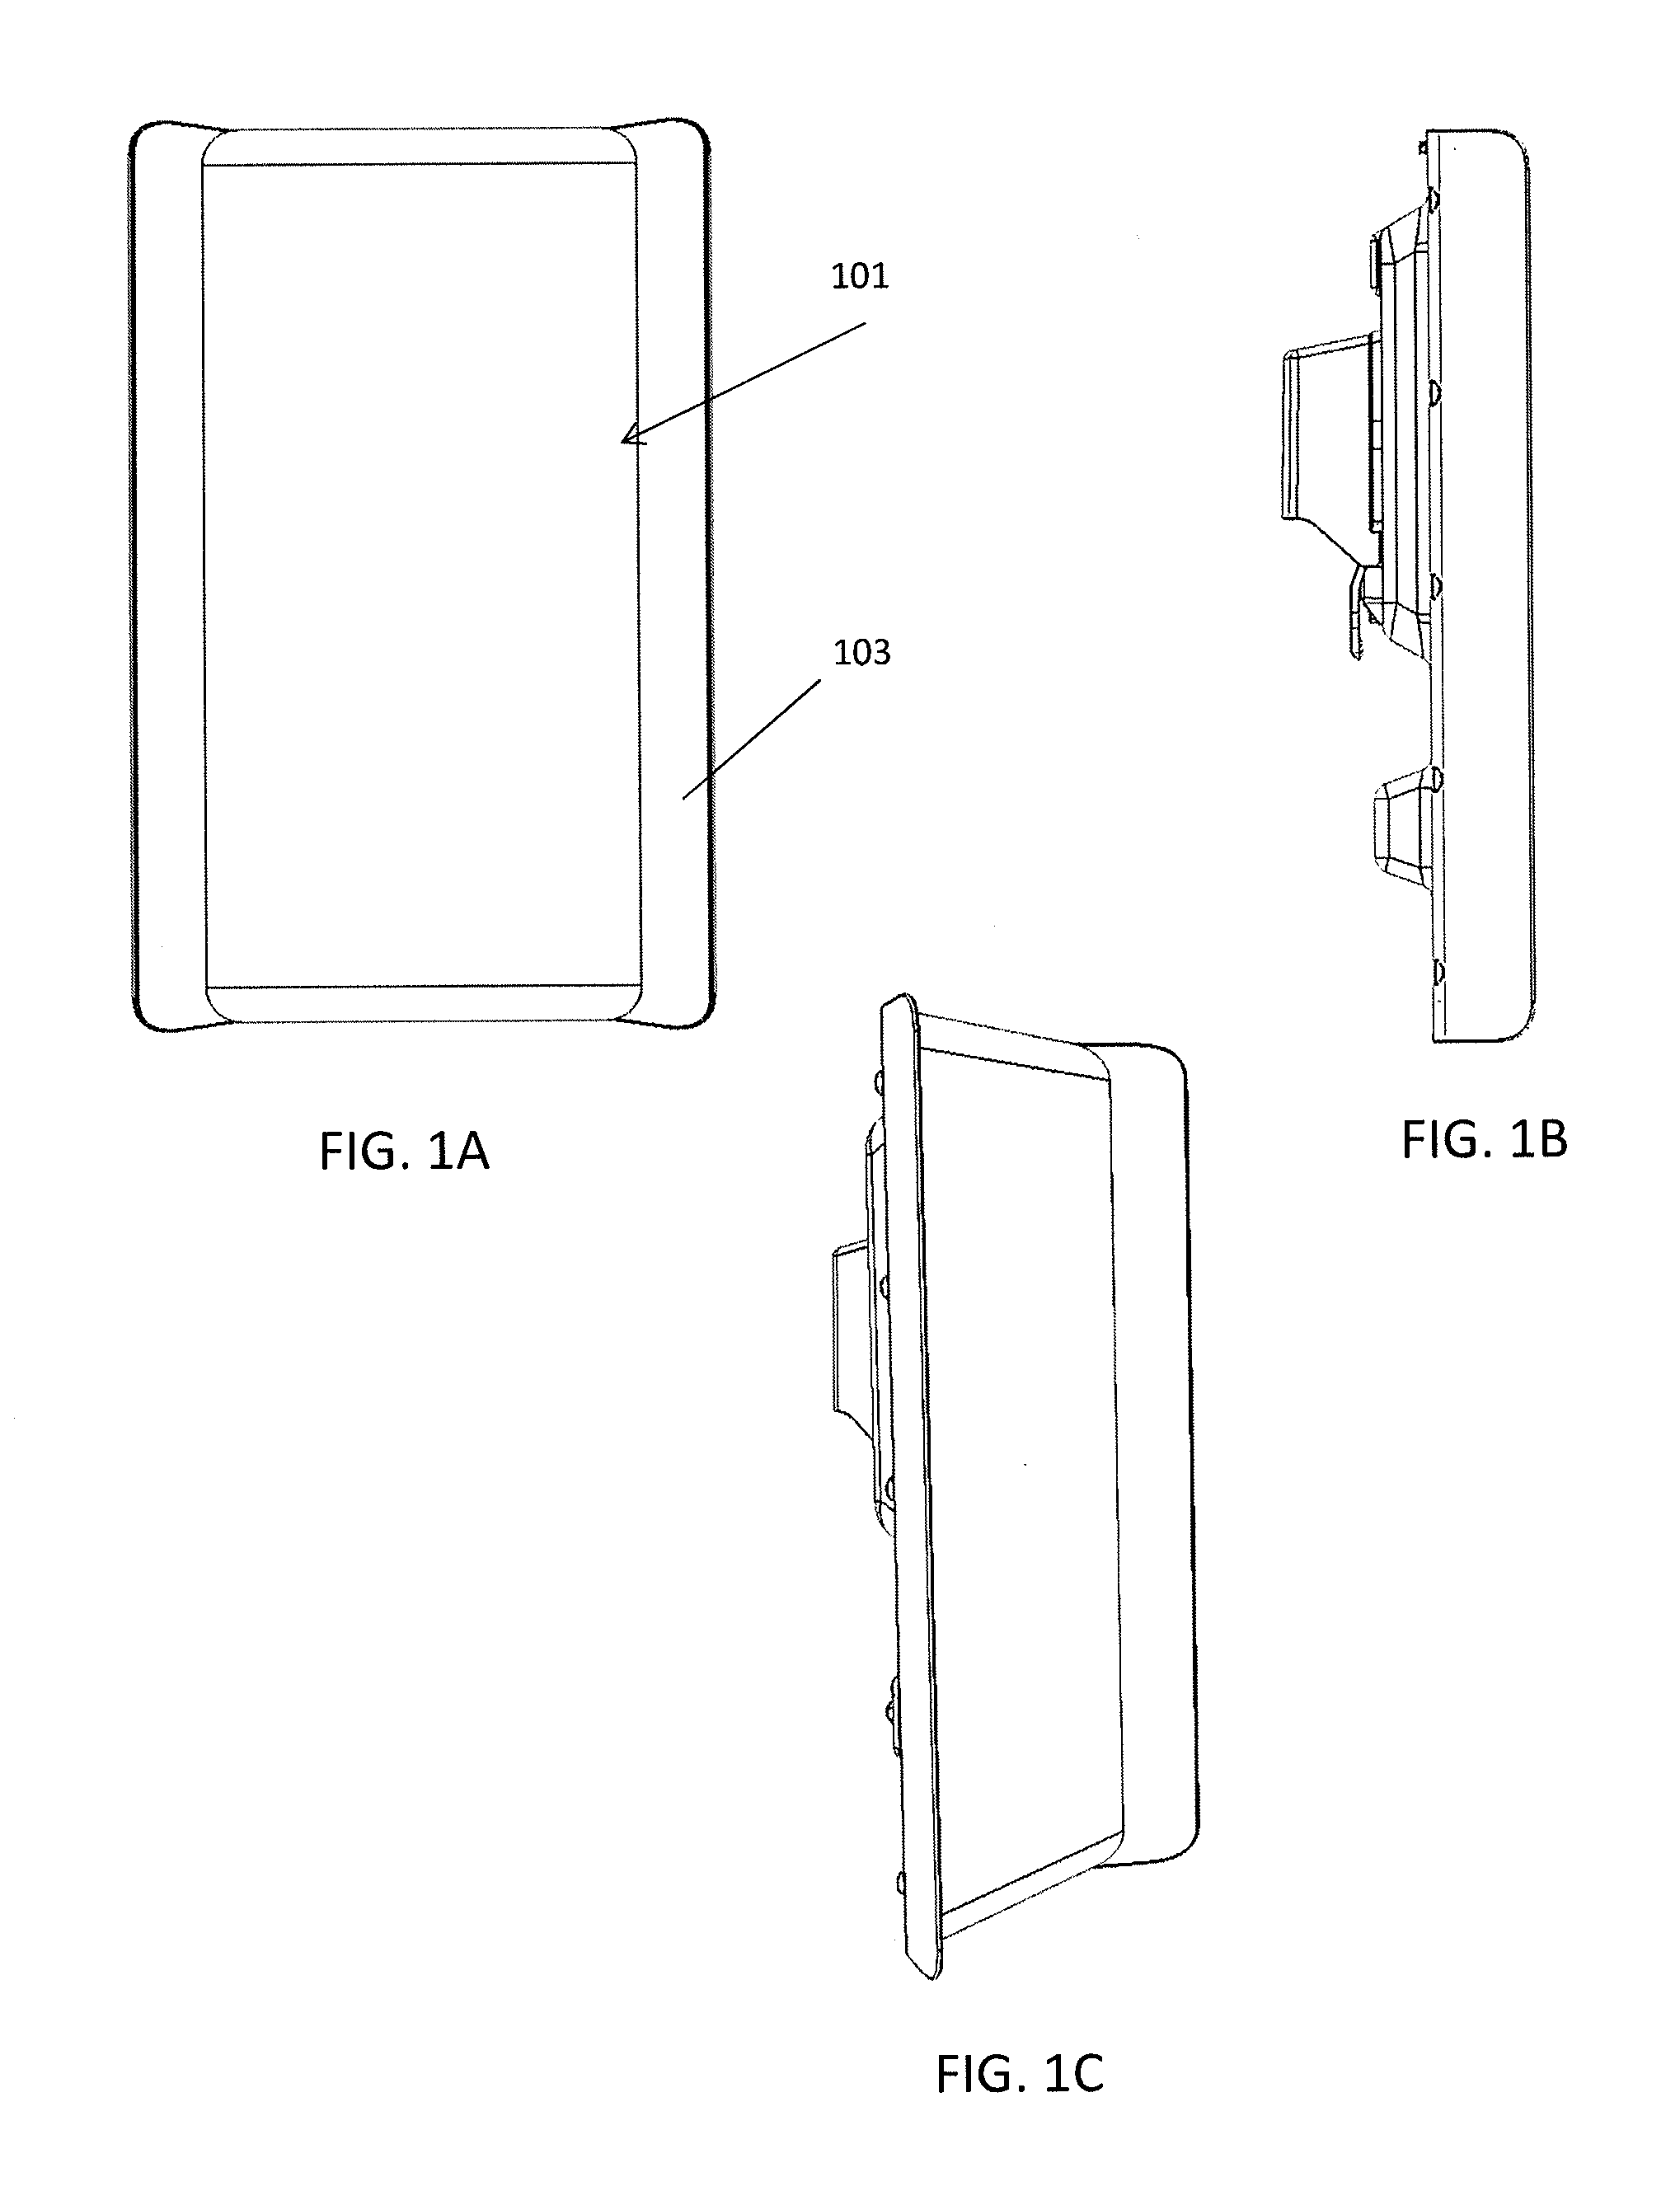 Methods of operating an access point using a plurality of directional beams